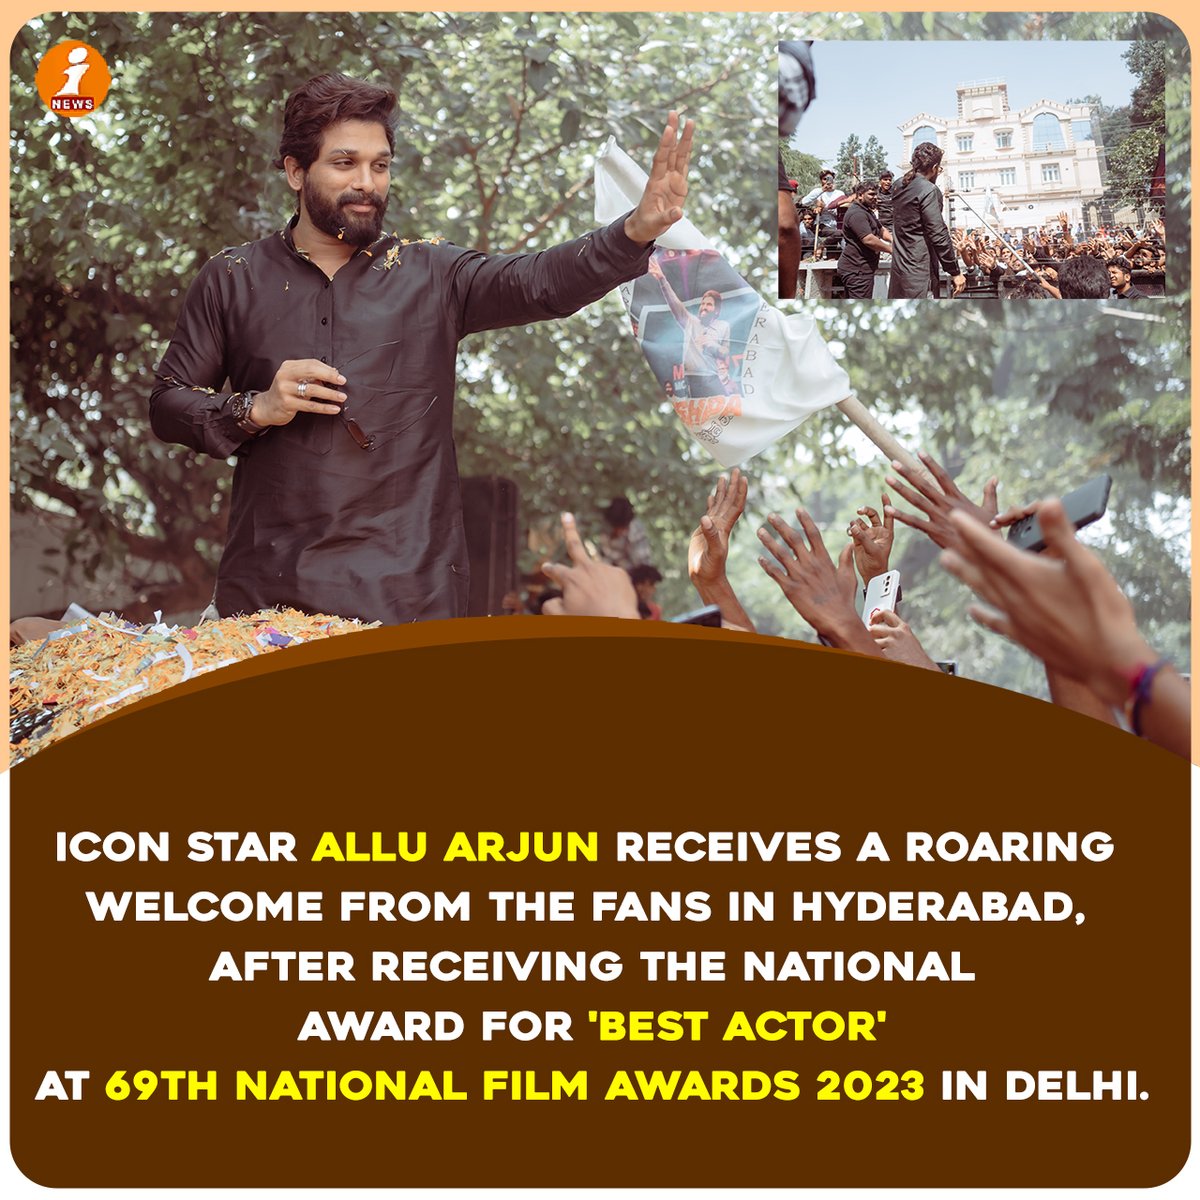 Allu Arjun receives a roaring welcome from the fans in Hyderabad | iNews Entertainment

#iNews #inewsentertainment #AlluArjun #Hyderabad #NationalAward